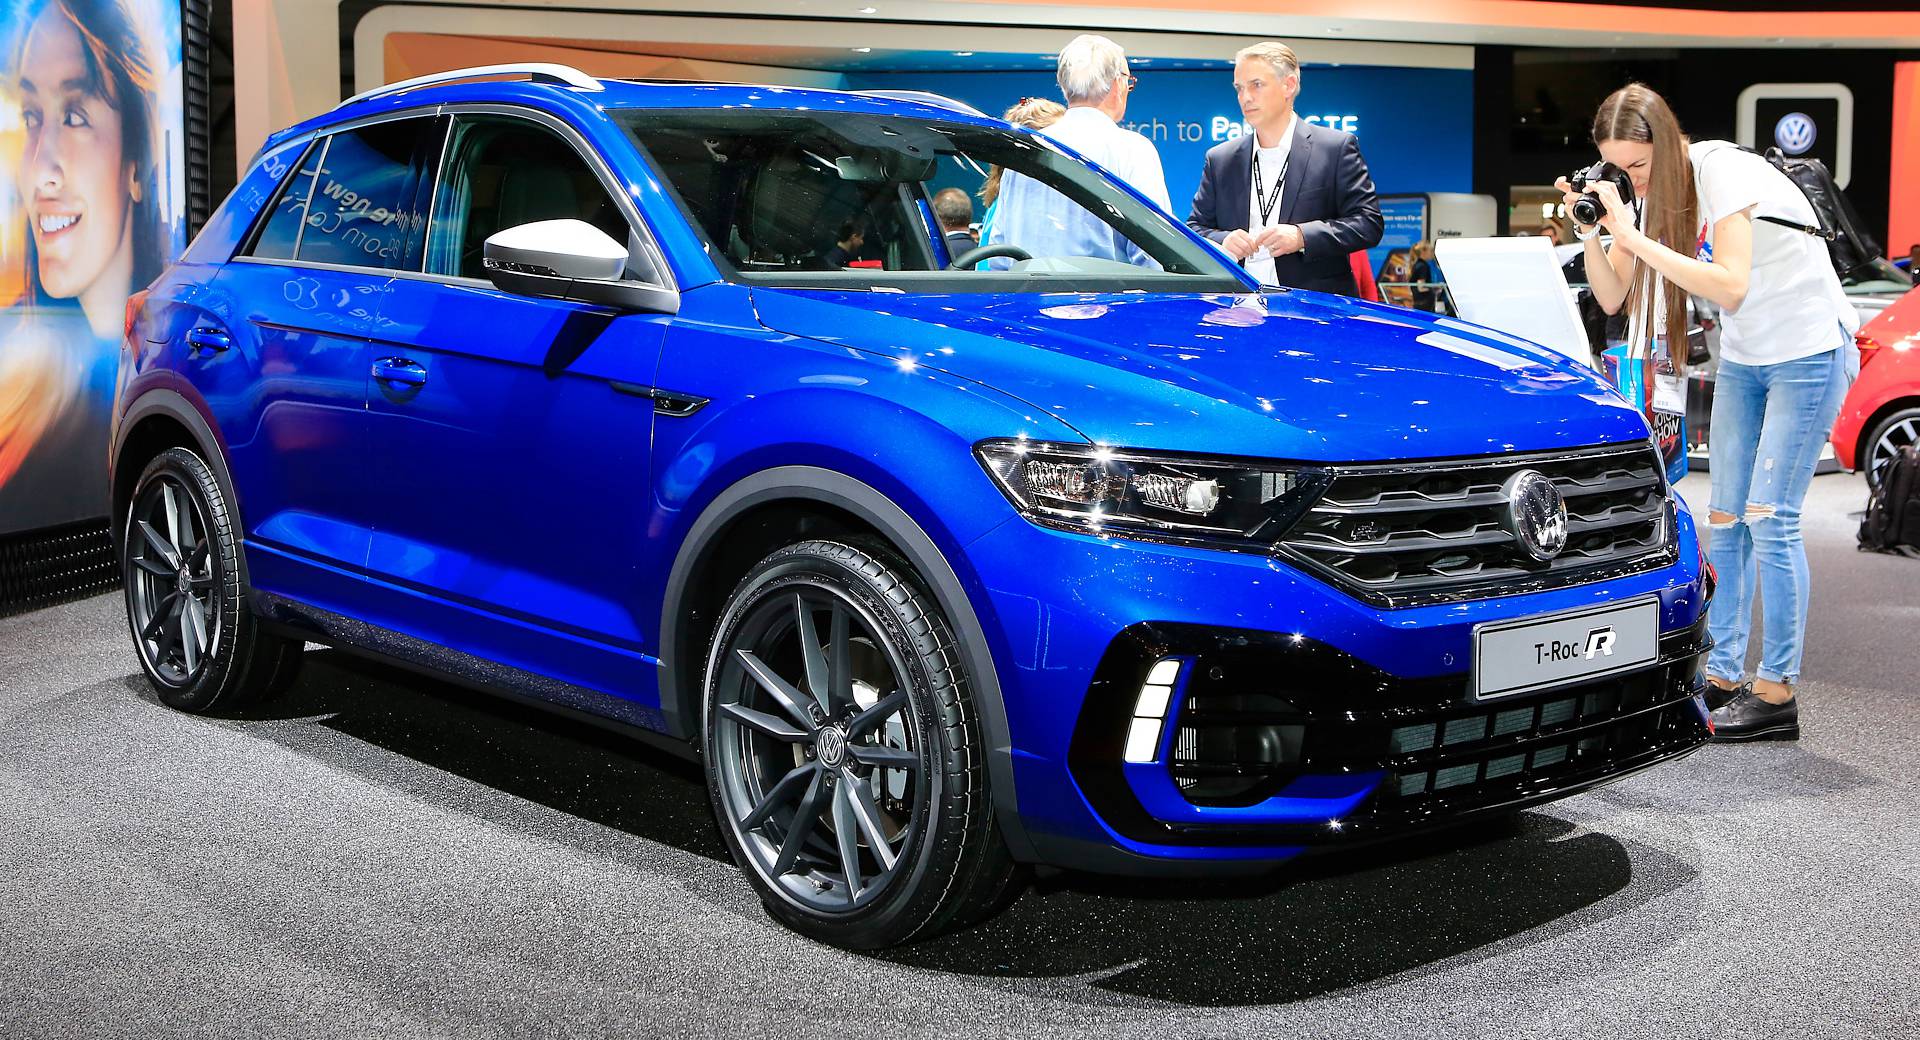 300 Ps Vw T Roc R Goes On Sale In Europe Costs Almost 50k Carscoops ...